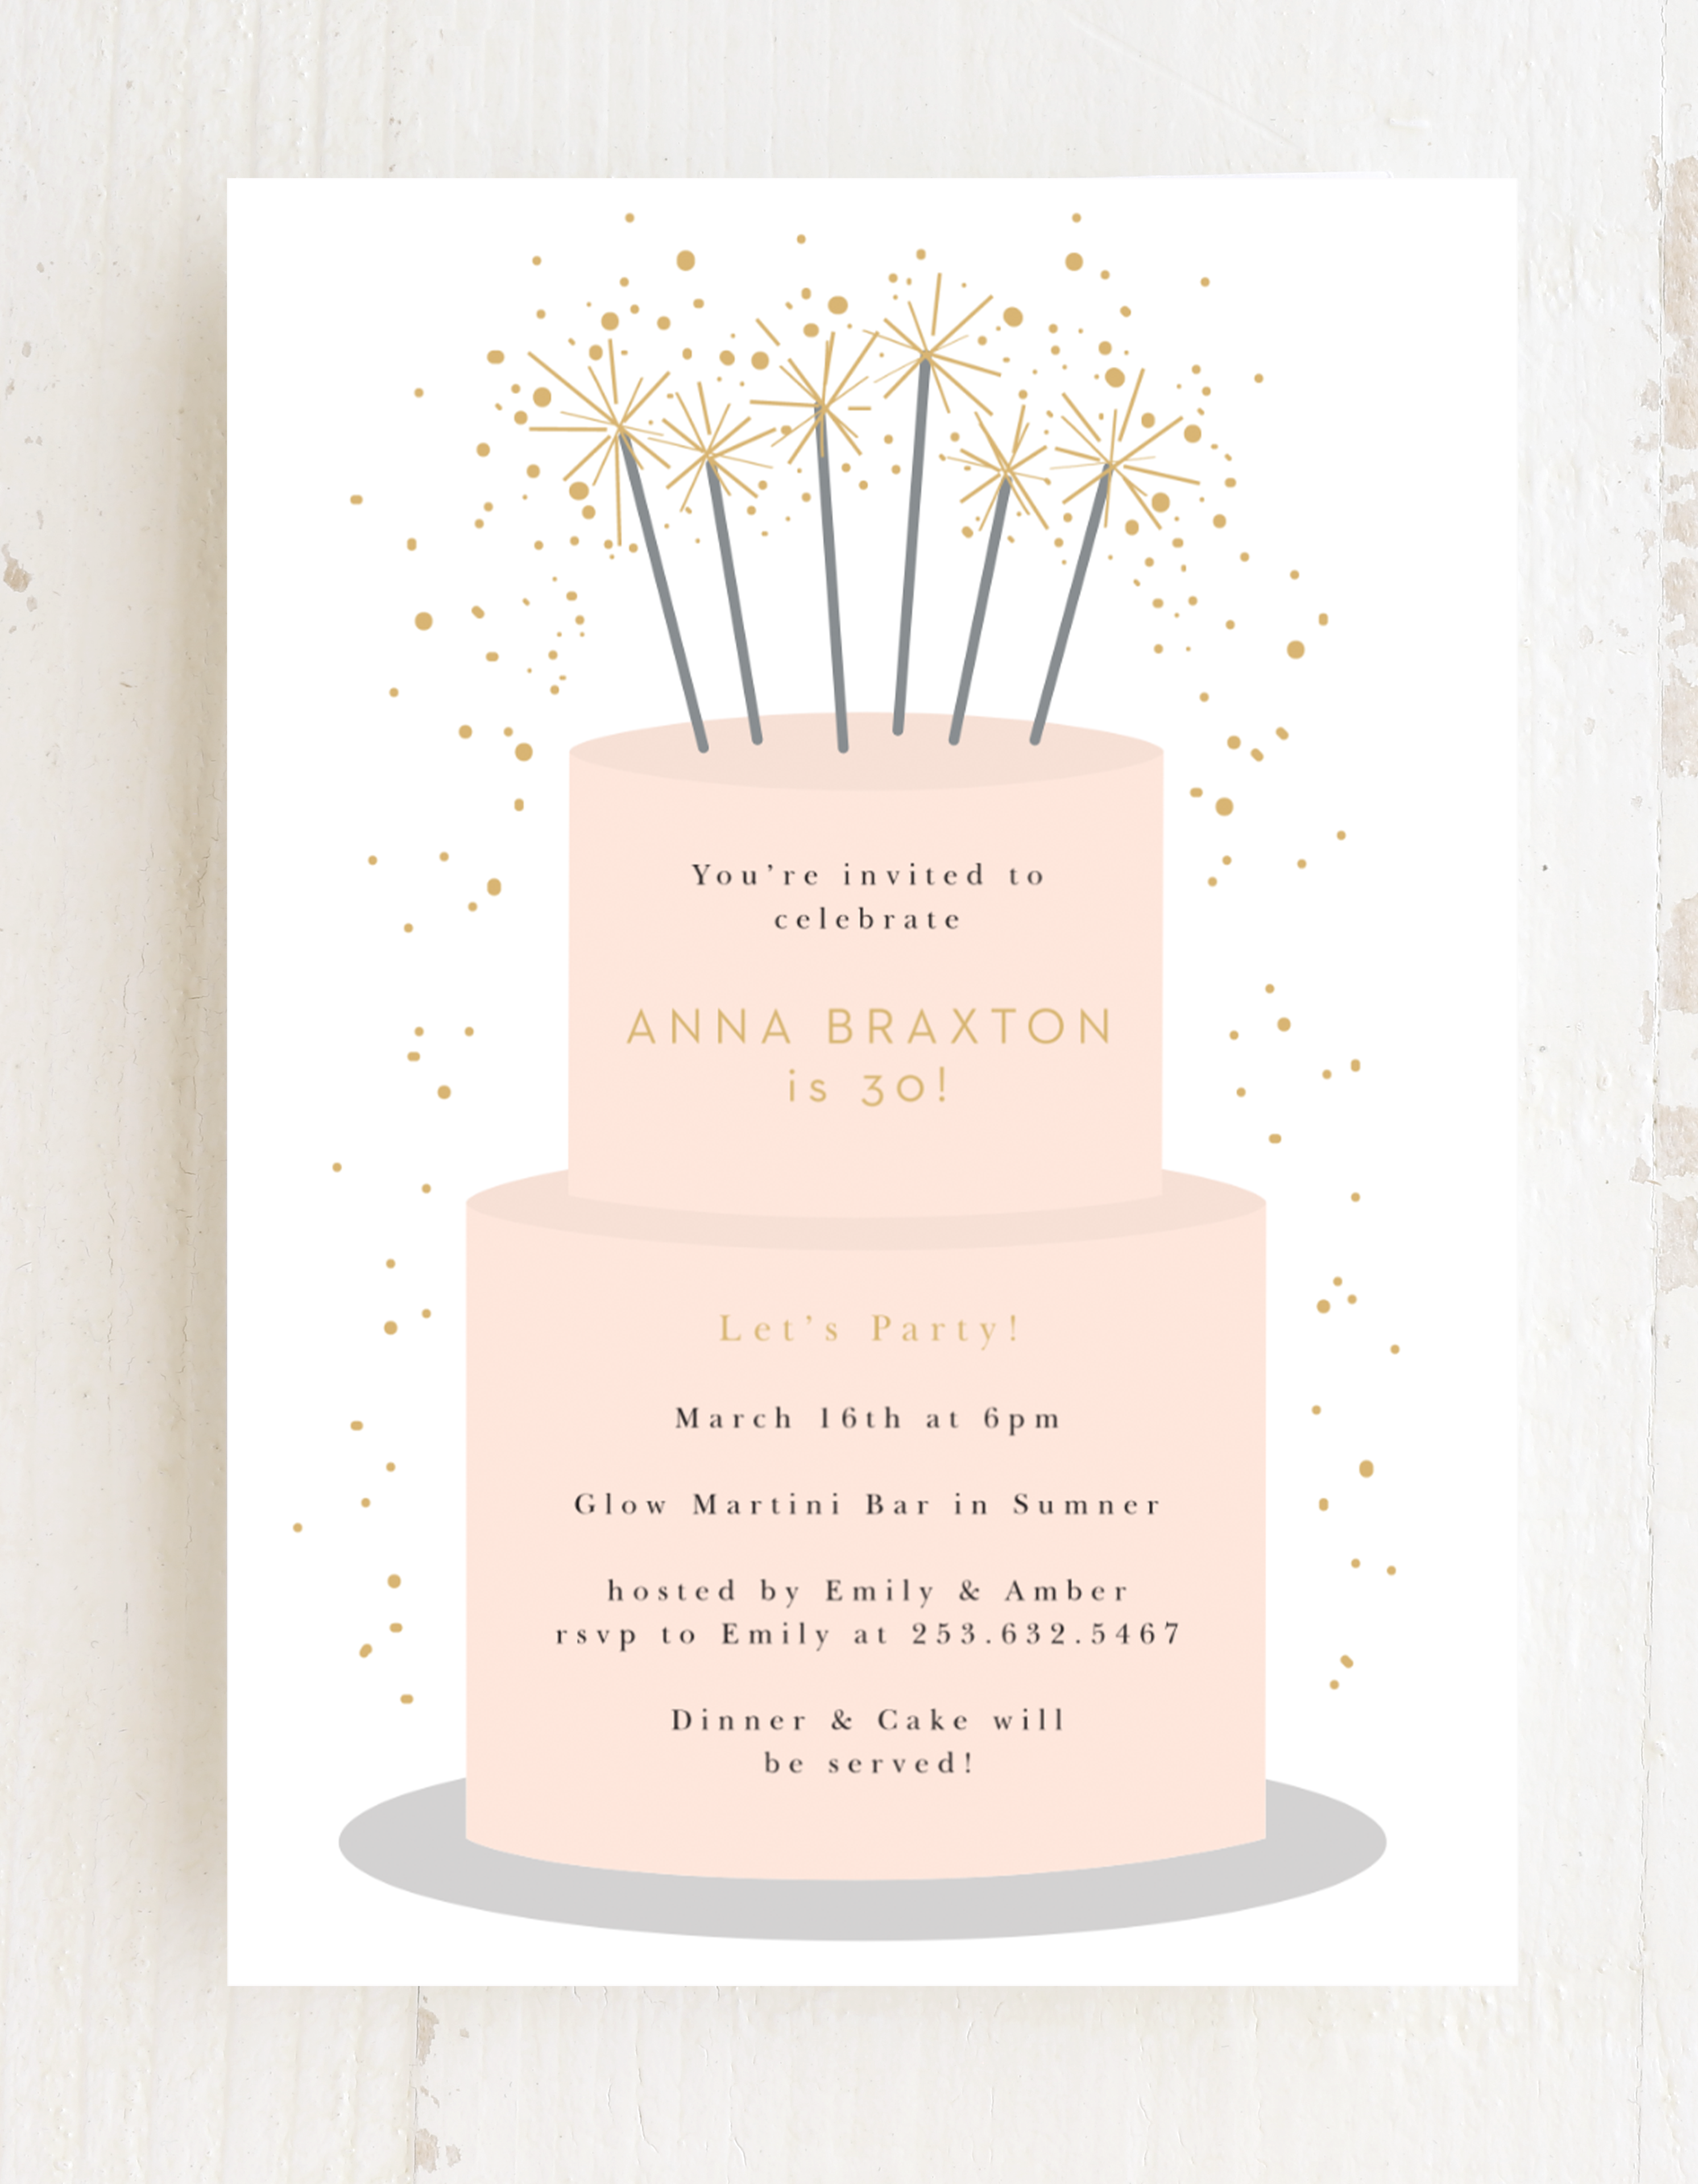 From 1st Birthday Invitations to 60th Birthday Invites, You’ll Find The Perfect Birthday Invitation Card at Basic Invite!